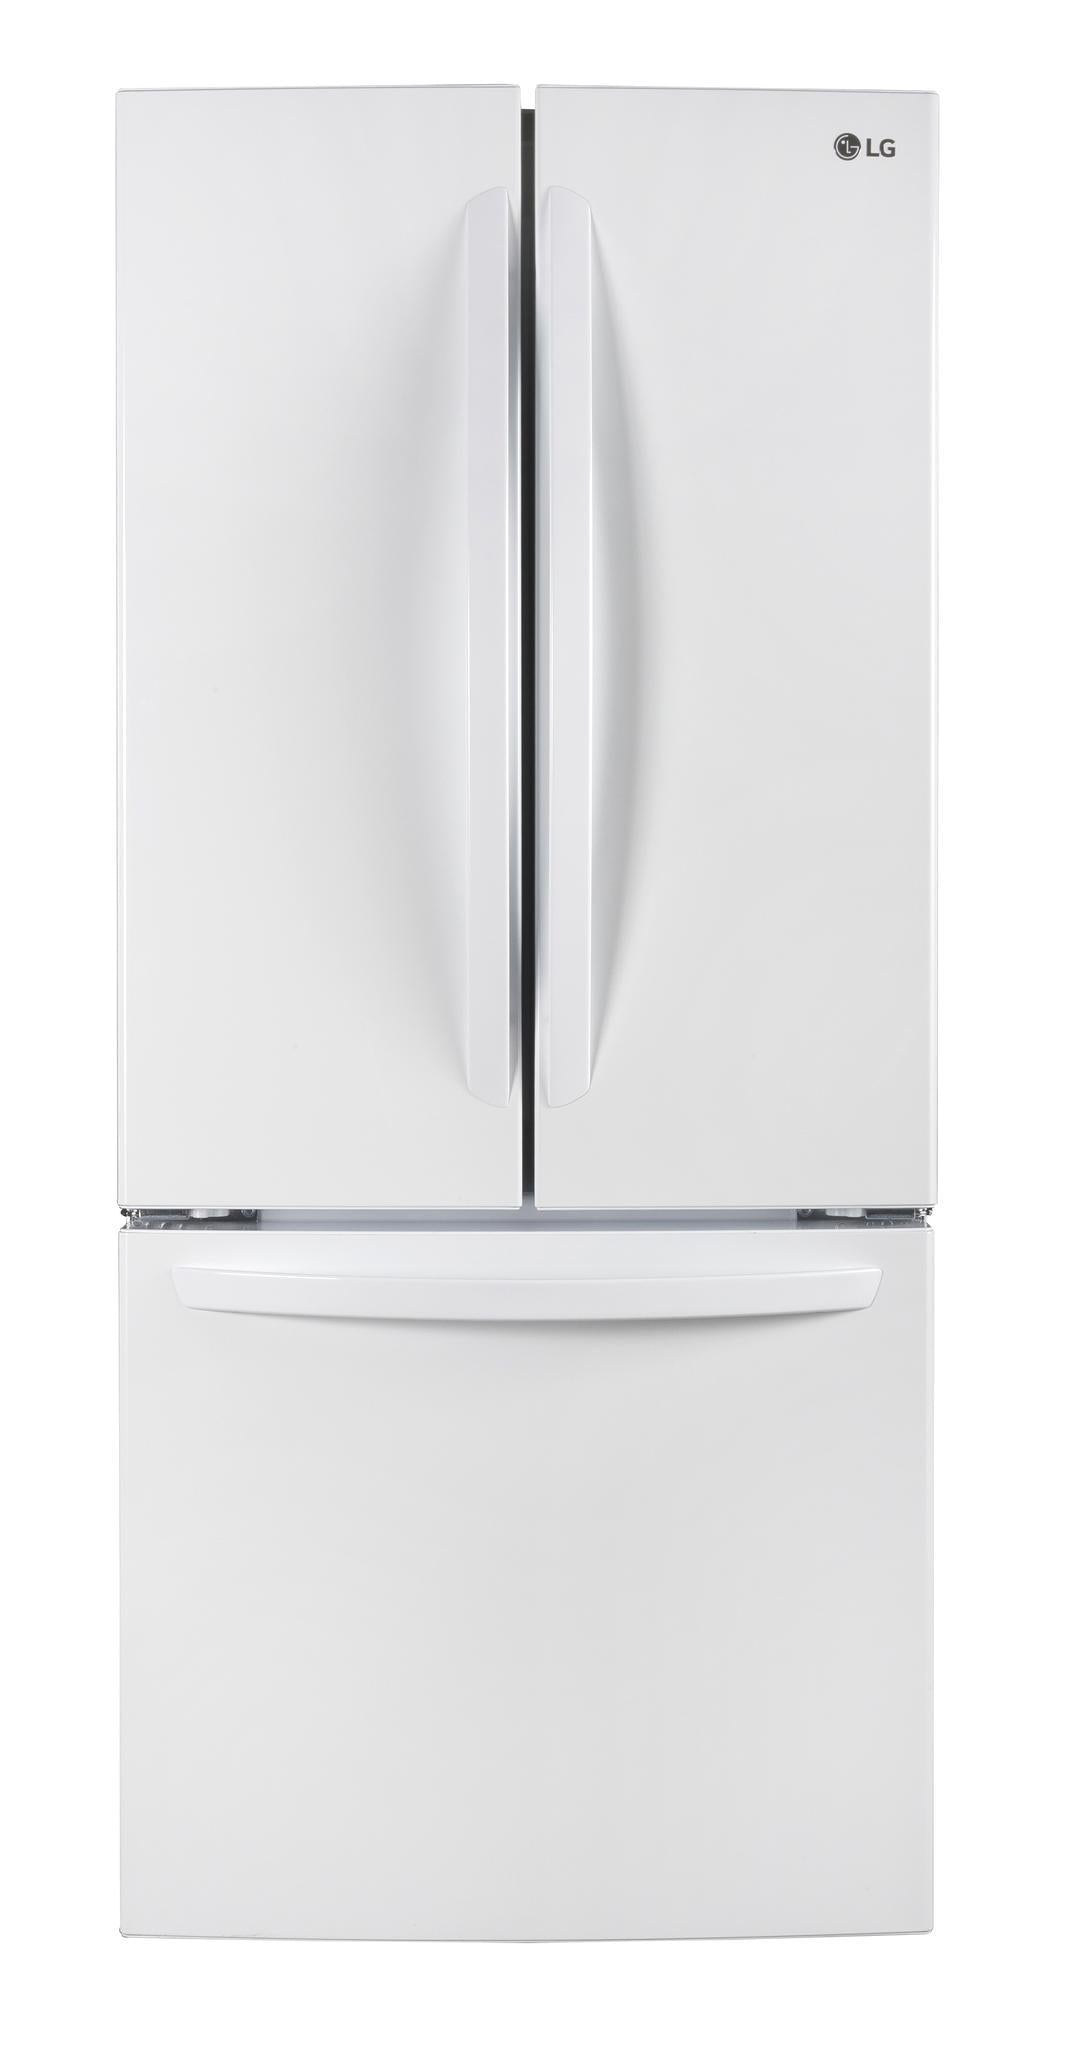 LG - 29.8 Inch 21.8 cu. ft French Door Refrigerator in White - LRFNS2200W